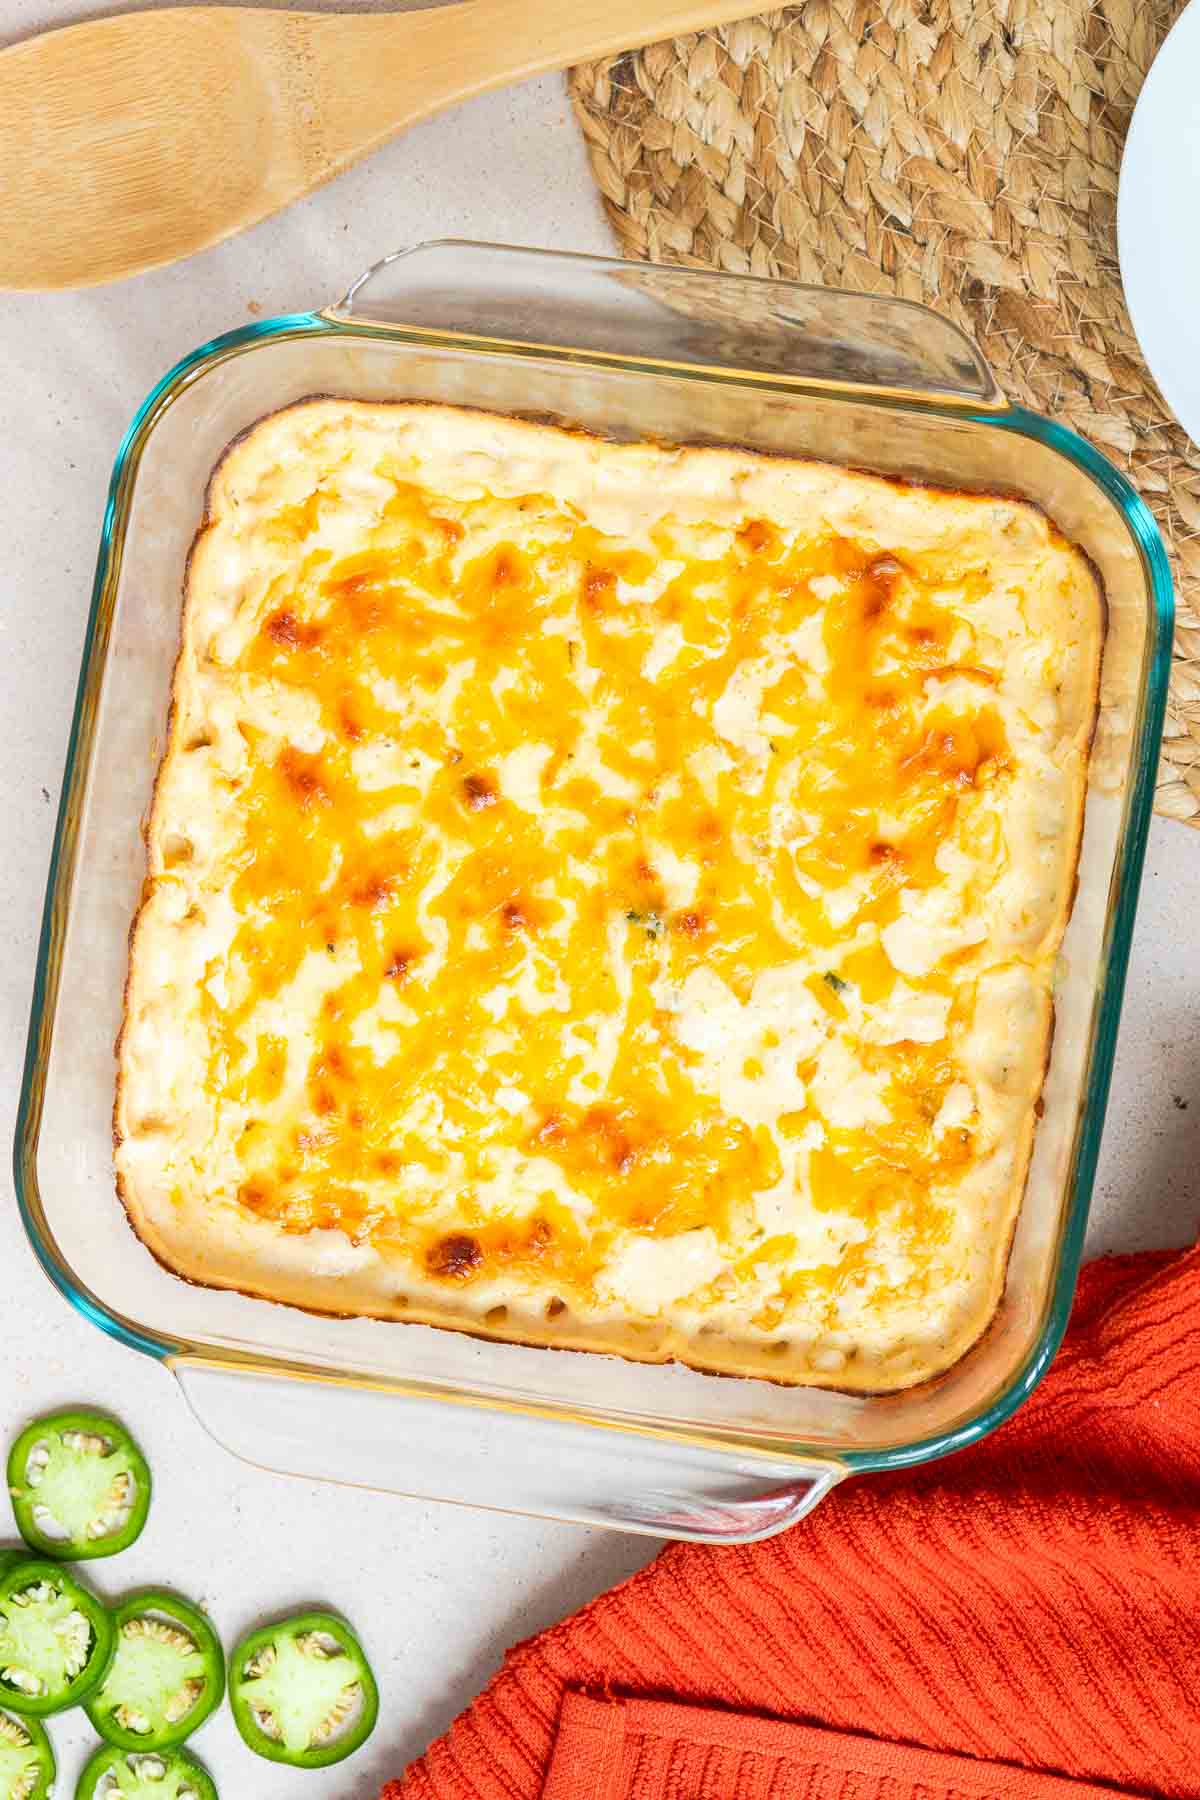 Creamy Jalapeño Corn Casserole baked until the cheese on top is golden.